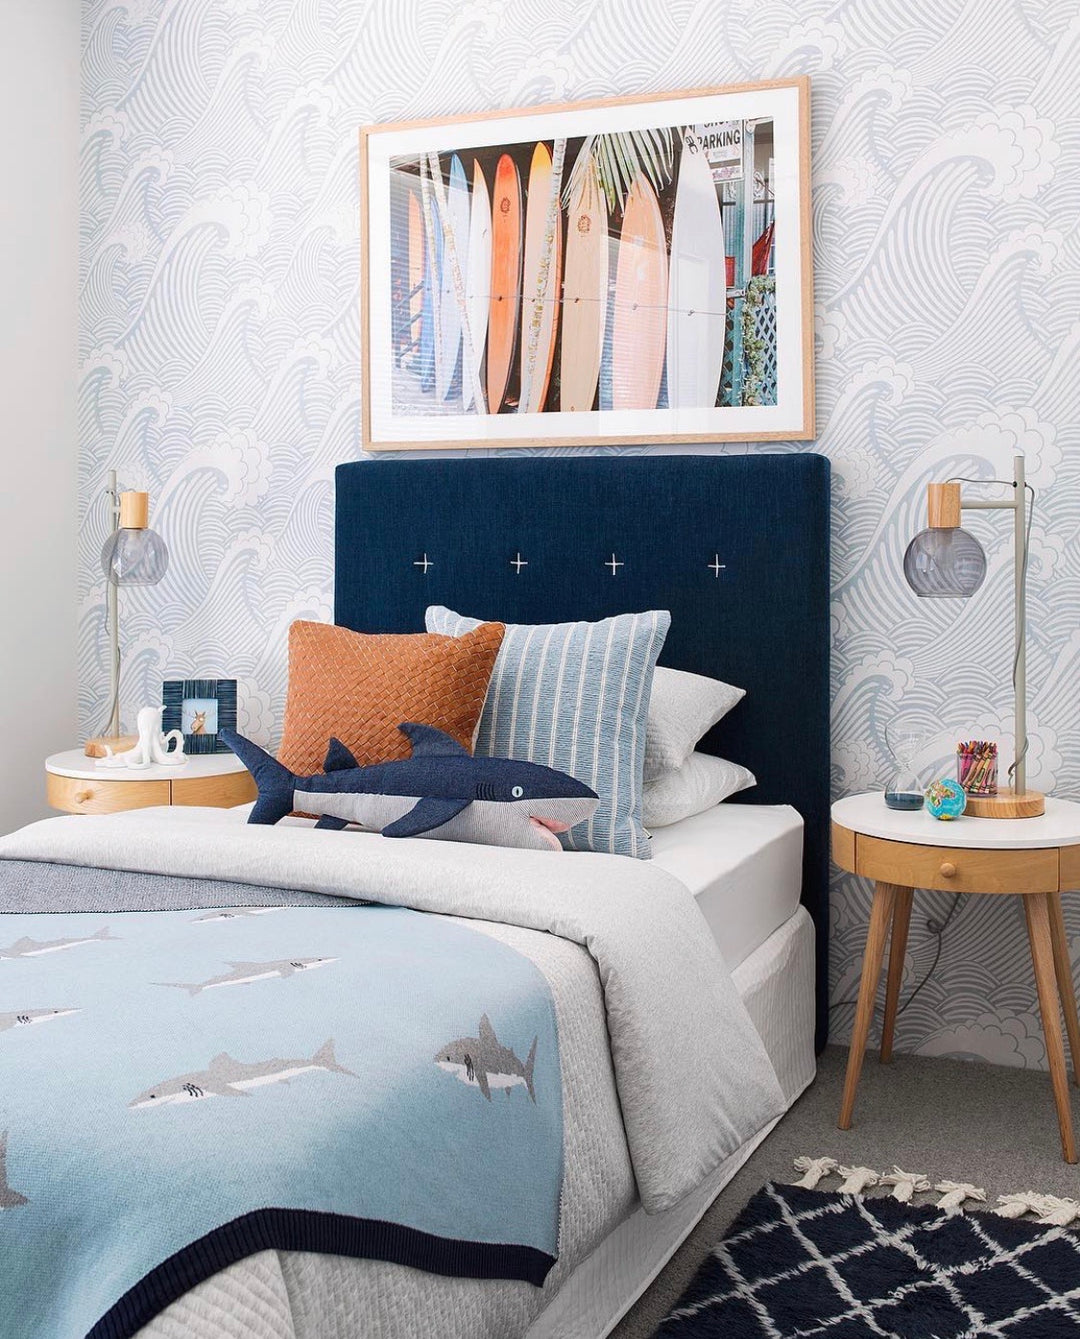 Sail Away wallpaper in a bedroom with nautical themed bedsheets